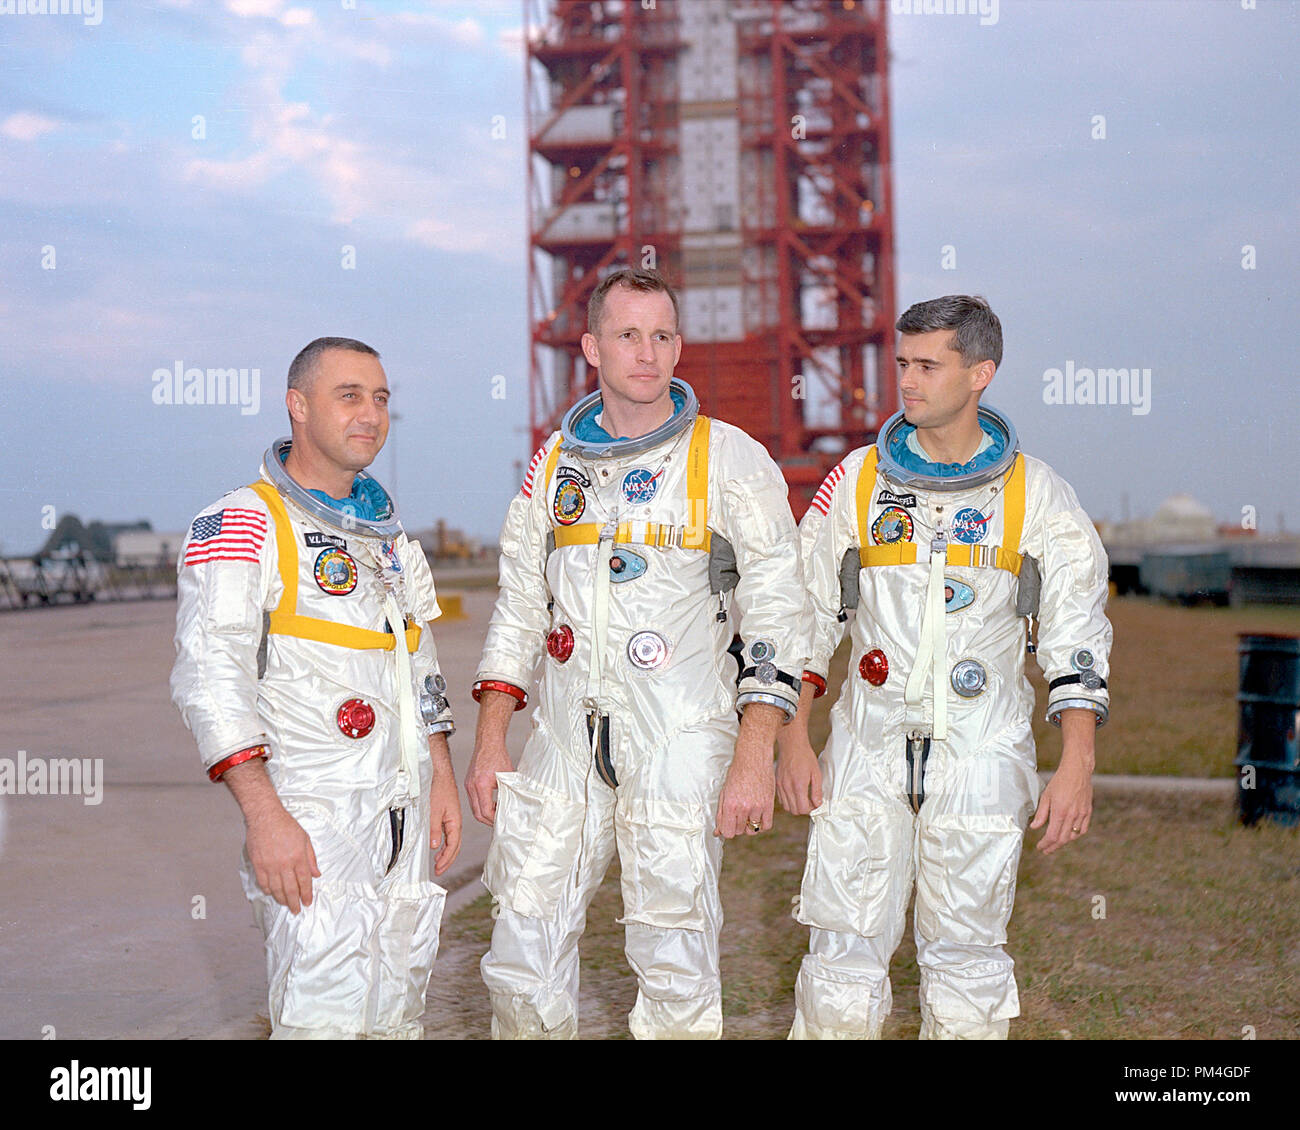 Astronauts (left to right) Gus Grissom, Ed White, and Roger Chaffee, pose in front of Launch Complex 34 which is housing their Saturn 1 launch vehicle. January of 1967. The astronauts later died tragically in a fire on the pad.   File Reference # 1001 001THA Stock Photo